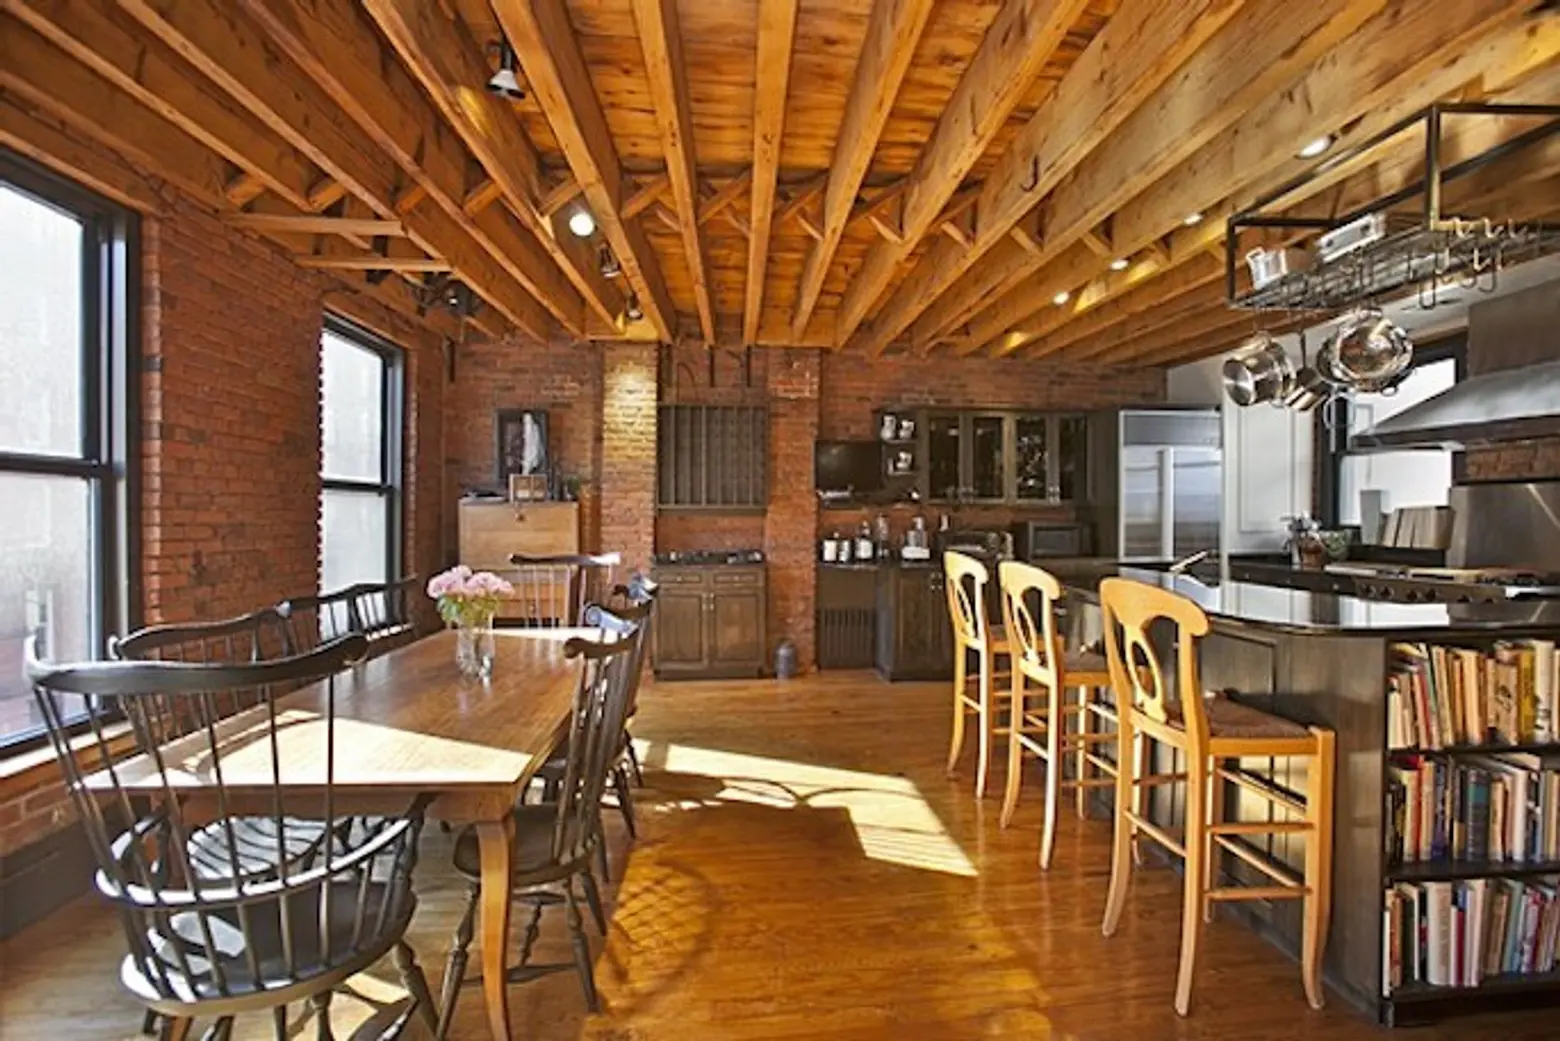 155 Duane Street, townhouse with five-story atrium, live/workspace in Tribeca